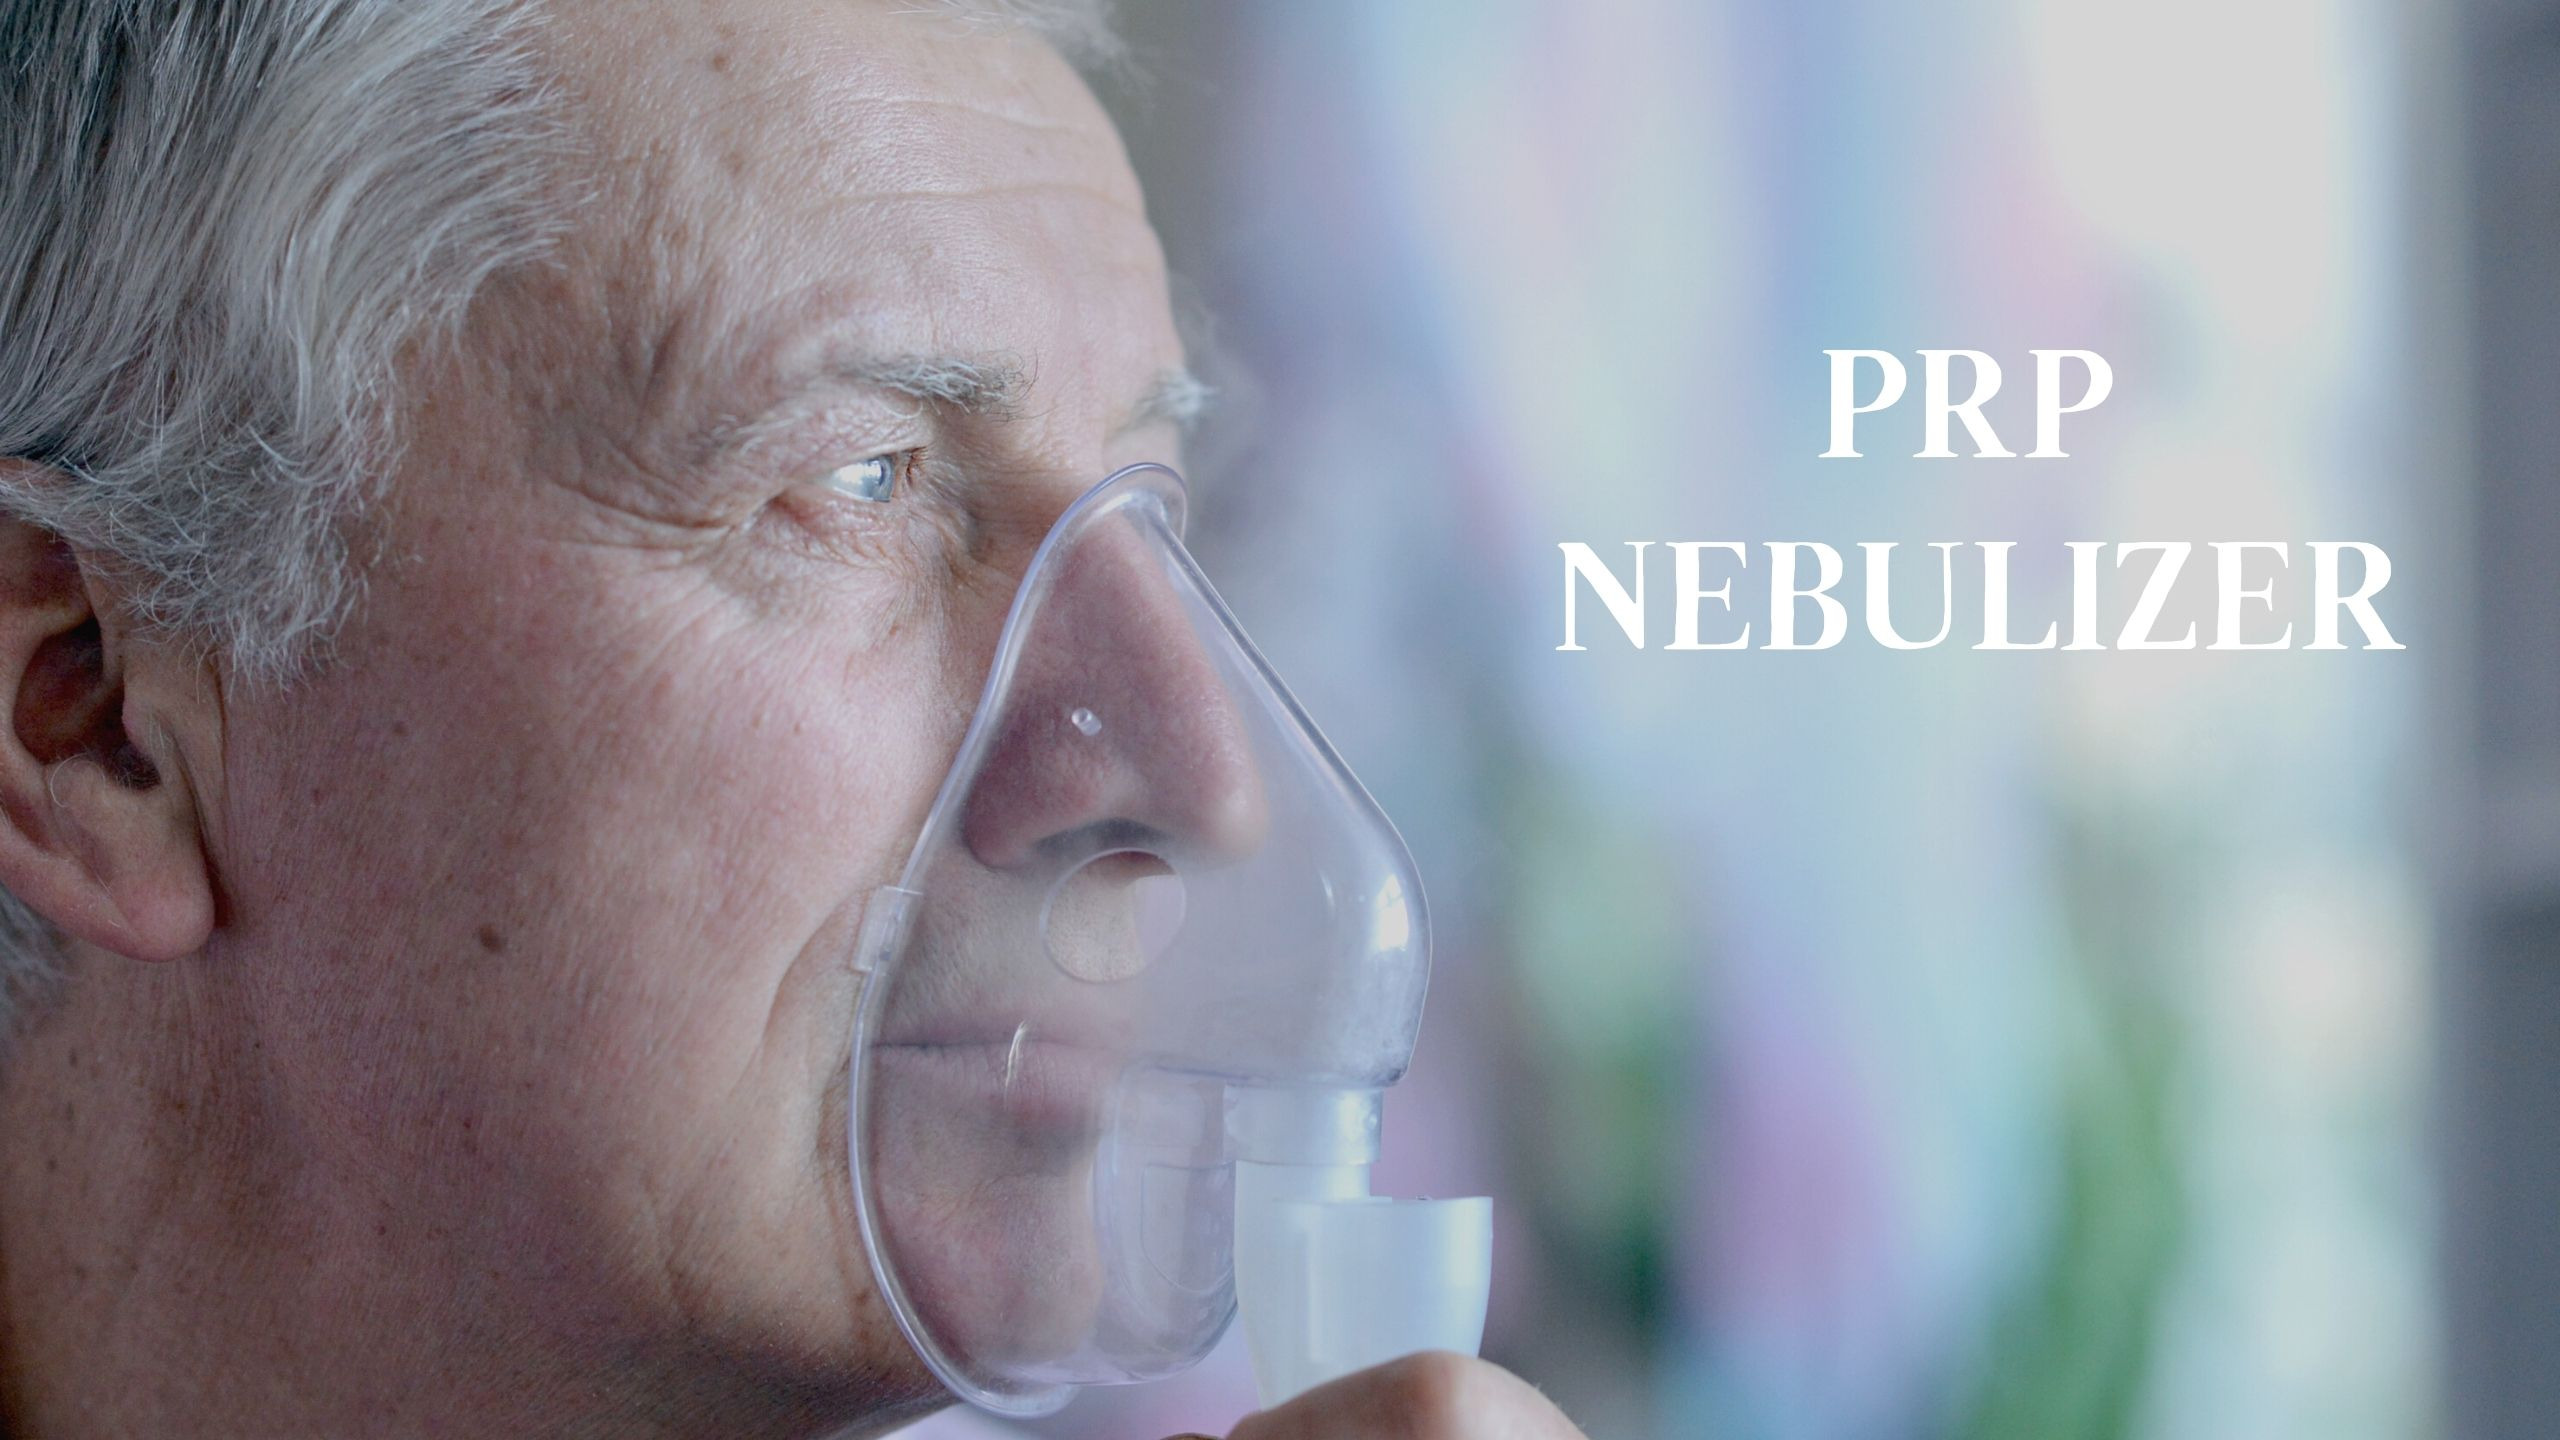 PRP nebulizer for lung diseases - an innovative treatment method